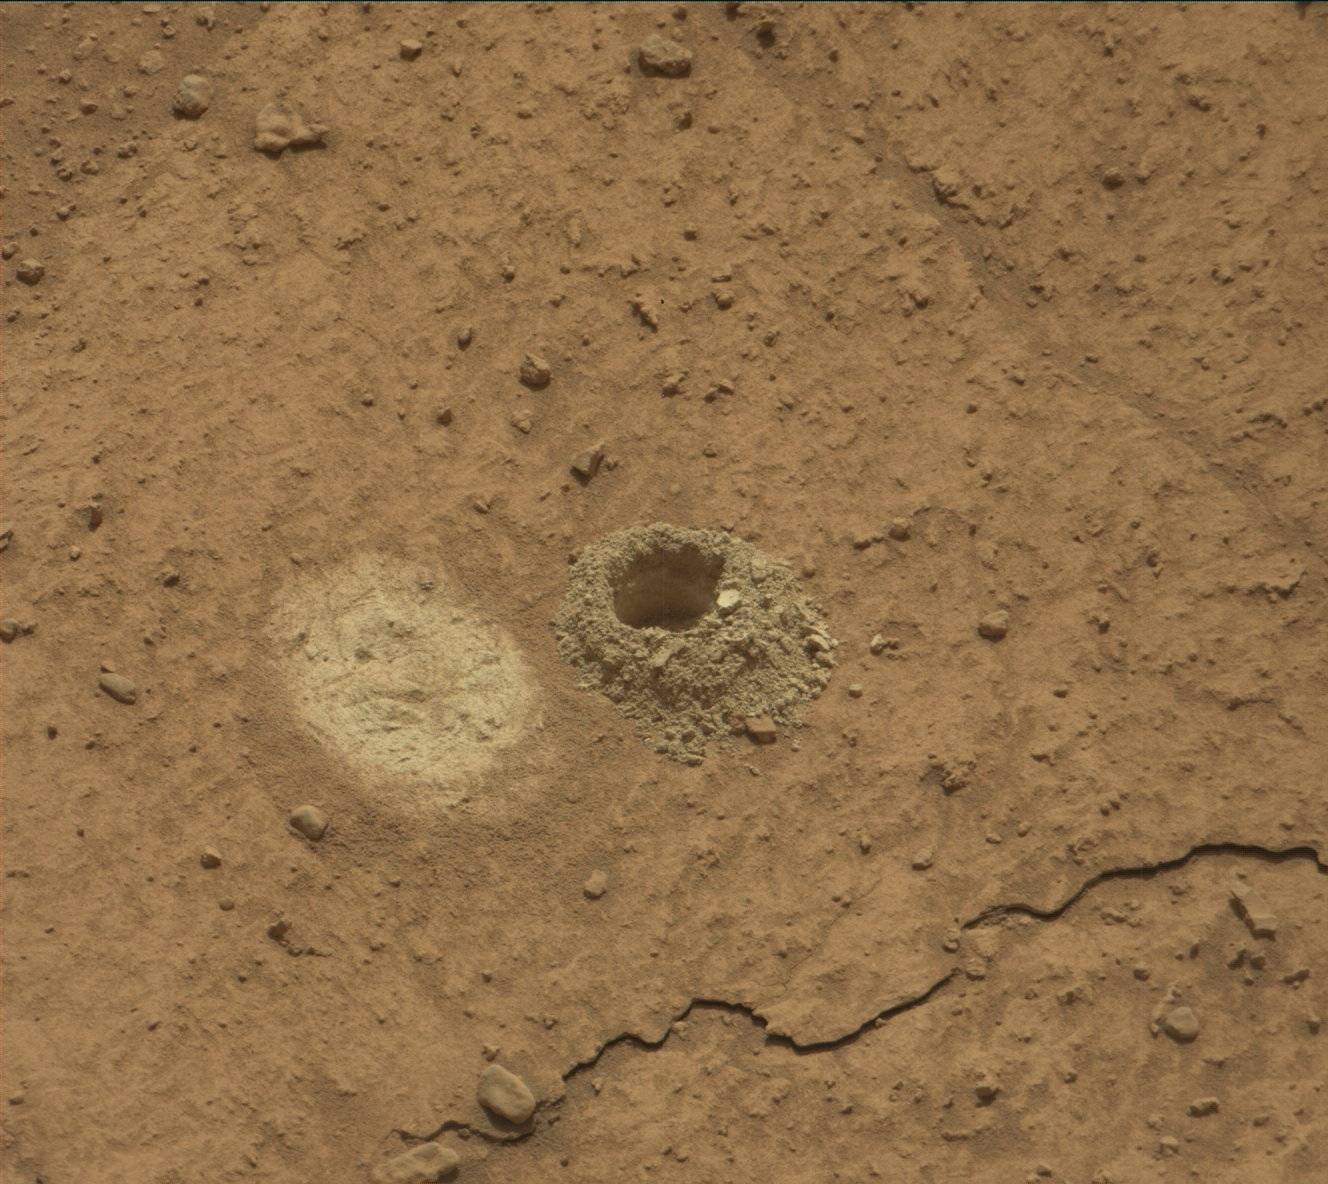 There are more than 40 holes on Mars.  The drill aboard the Curiosity rover created the hole in a rock that researchers call Mammoth Lakes.  The bright spot to the left of the hole is where the rover smoothed out a small area to collect spectroscopic data.  Credit: NASA/JPL-Caltech/MSSS